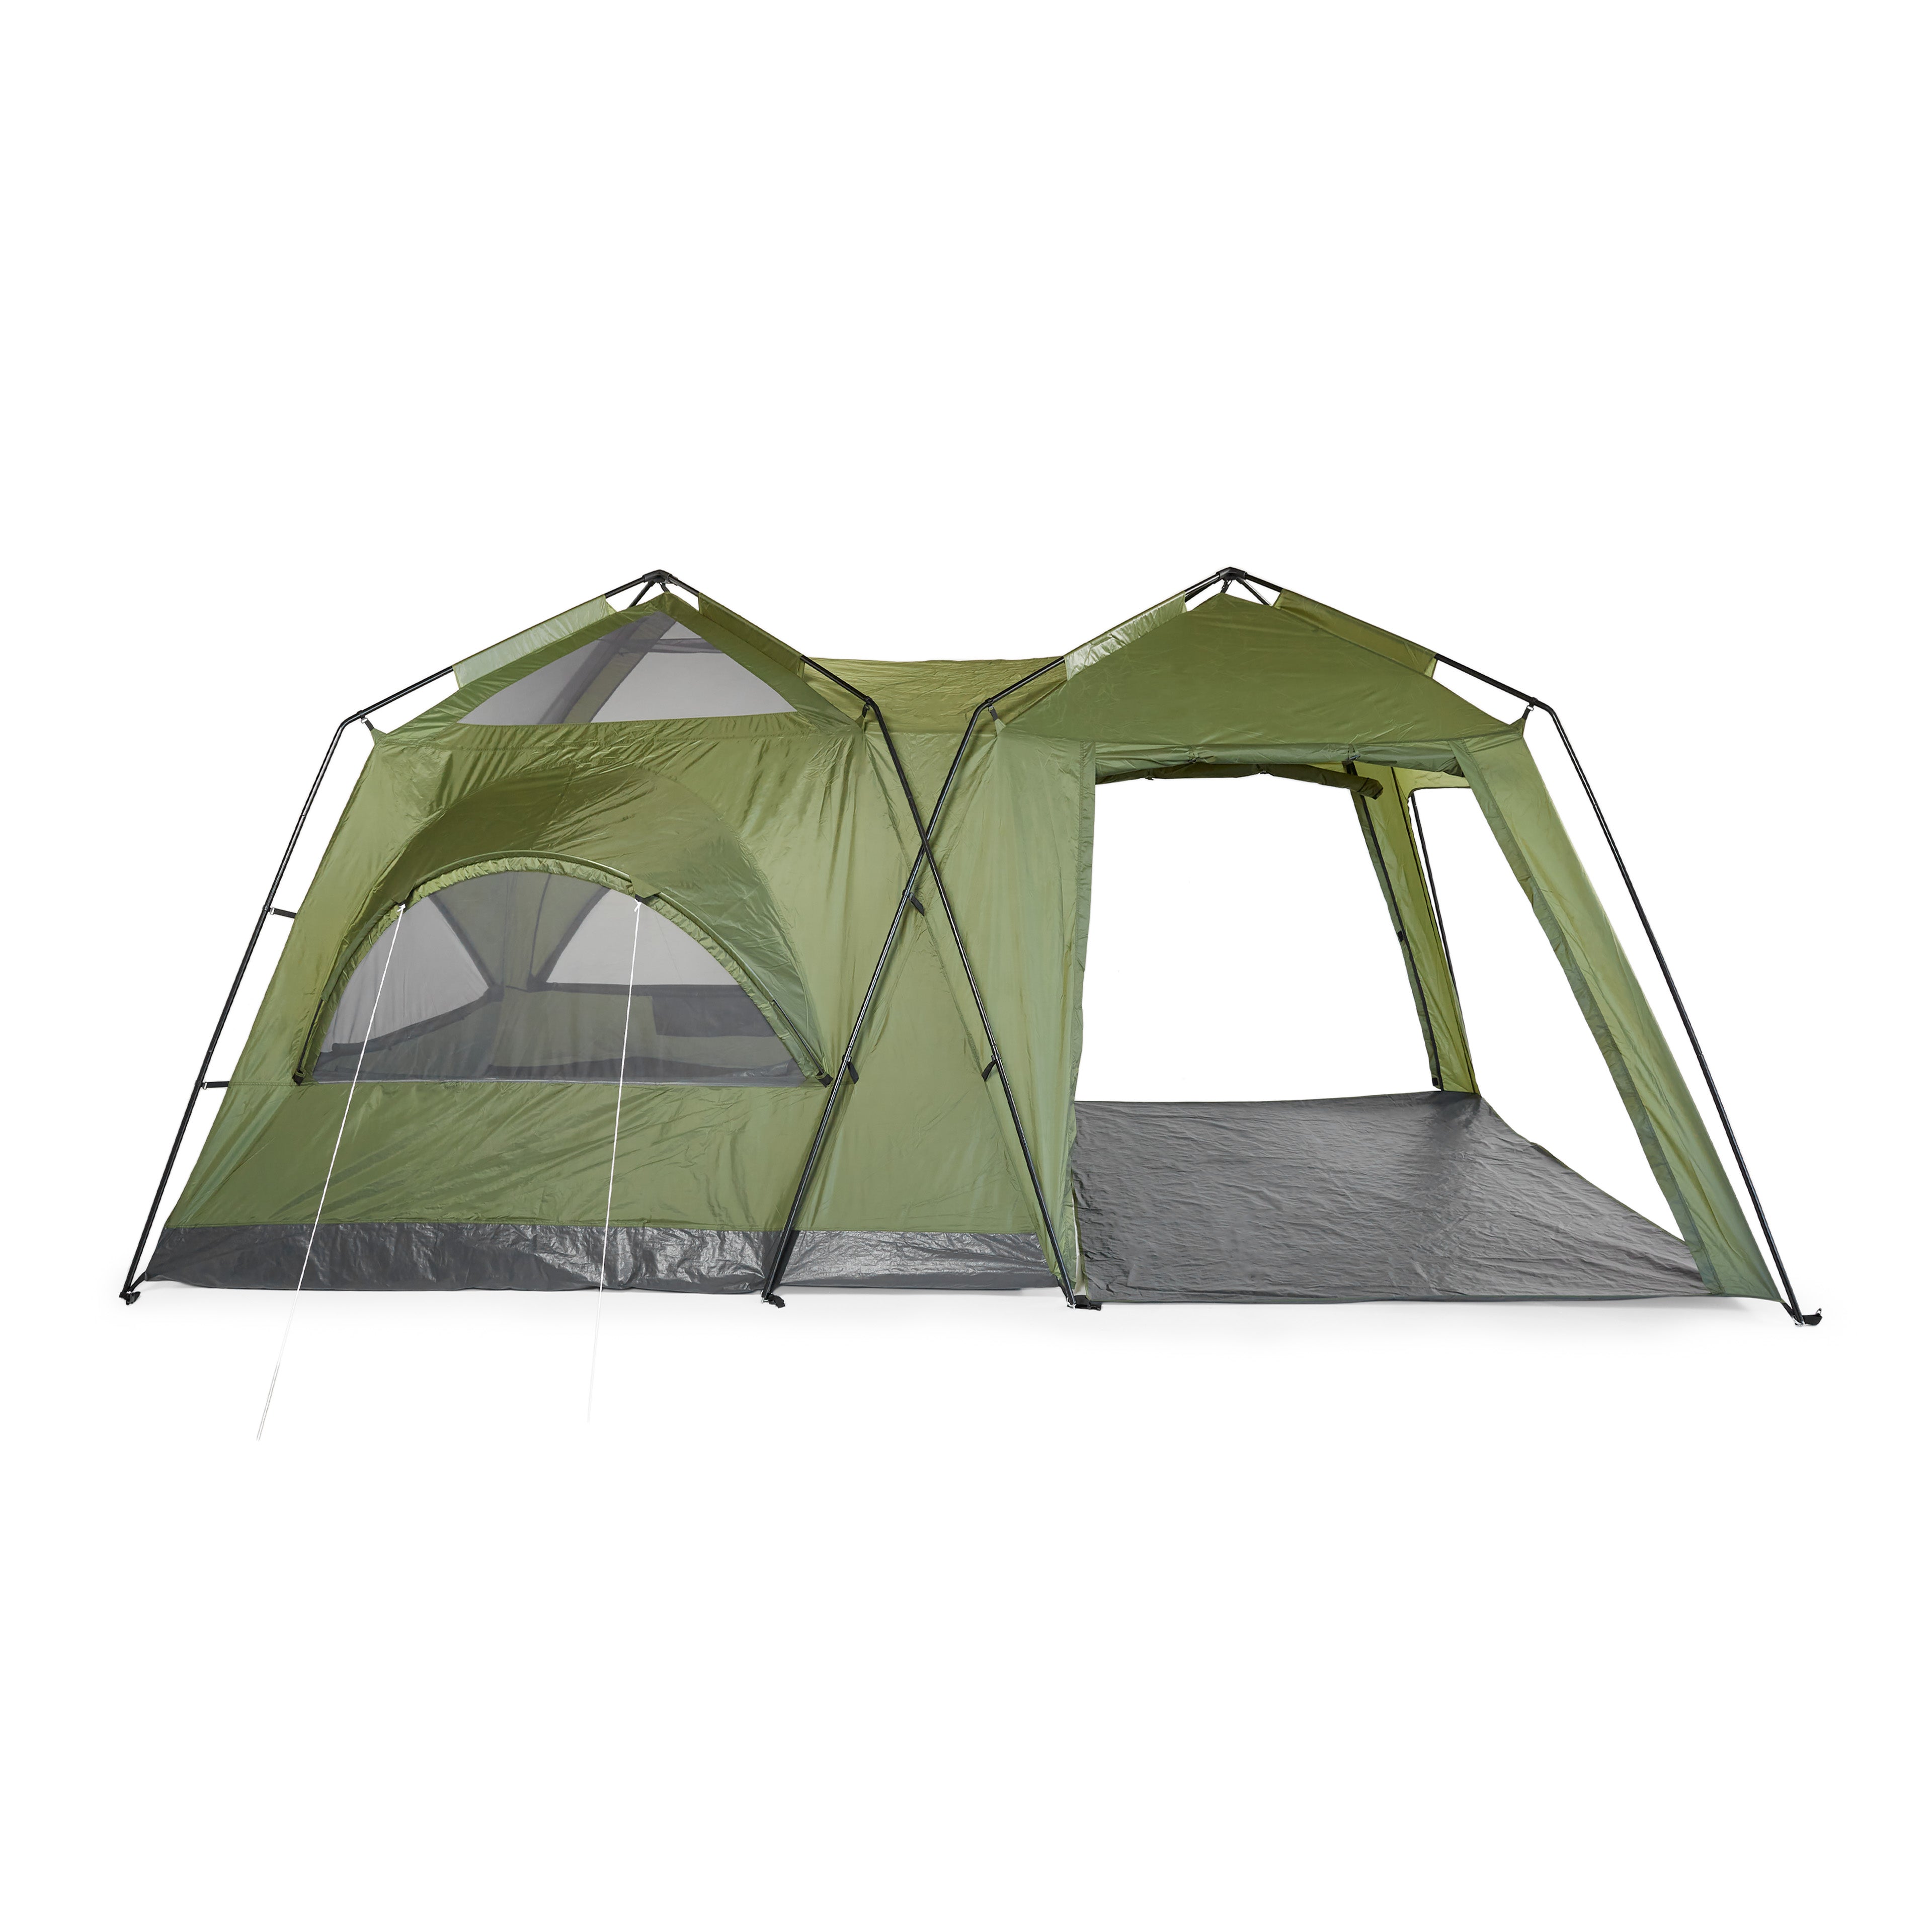 OMNICORE DESIGNS Cabin6Plus Six Person Cabin Tent with Canopy - 10' x 7' Tent / 10' x 7' Canopy Shelter